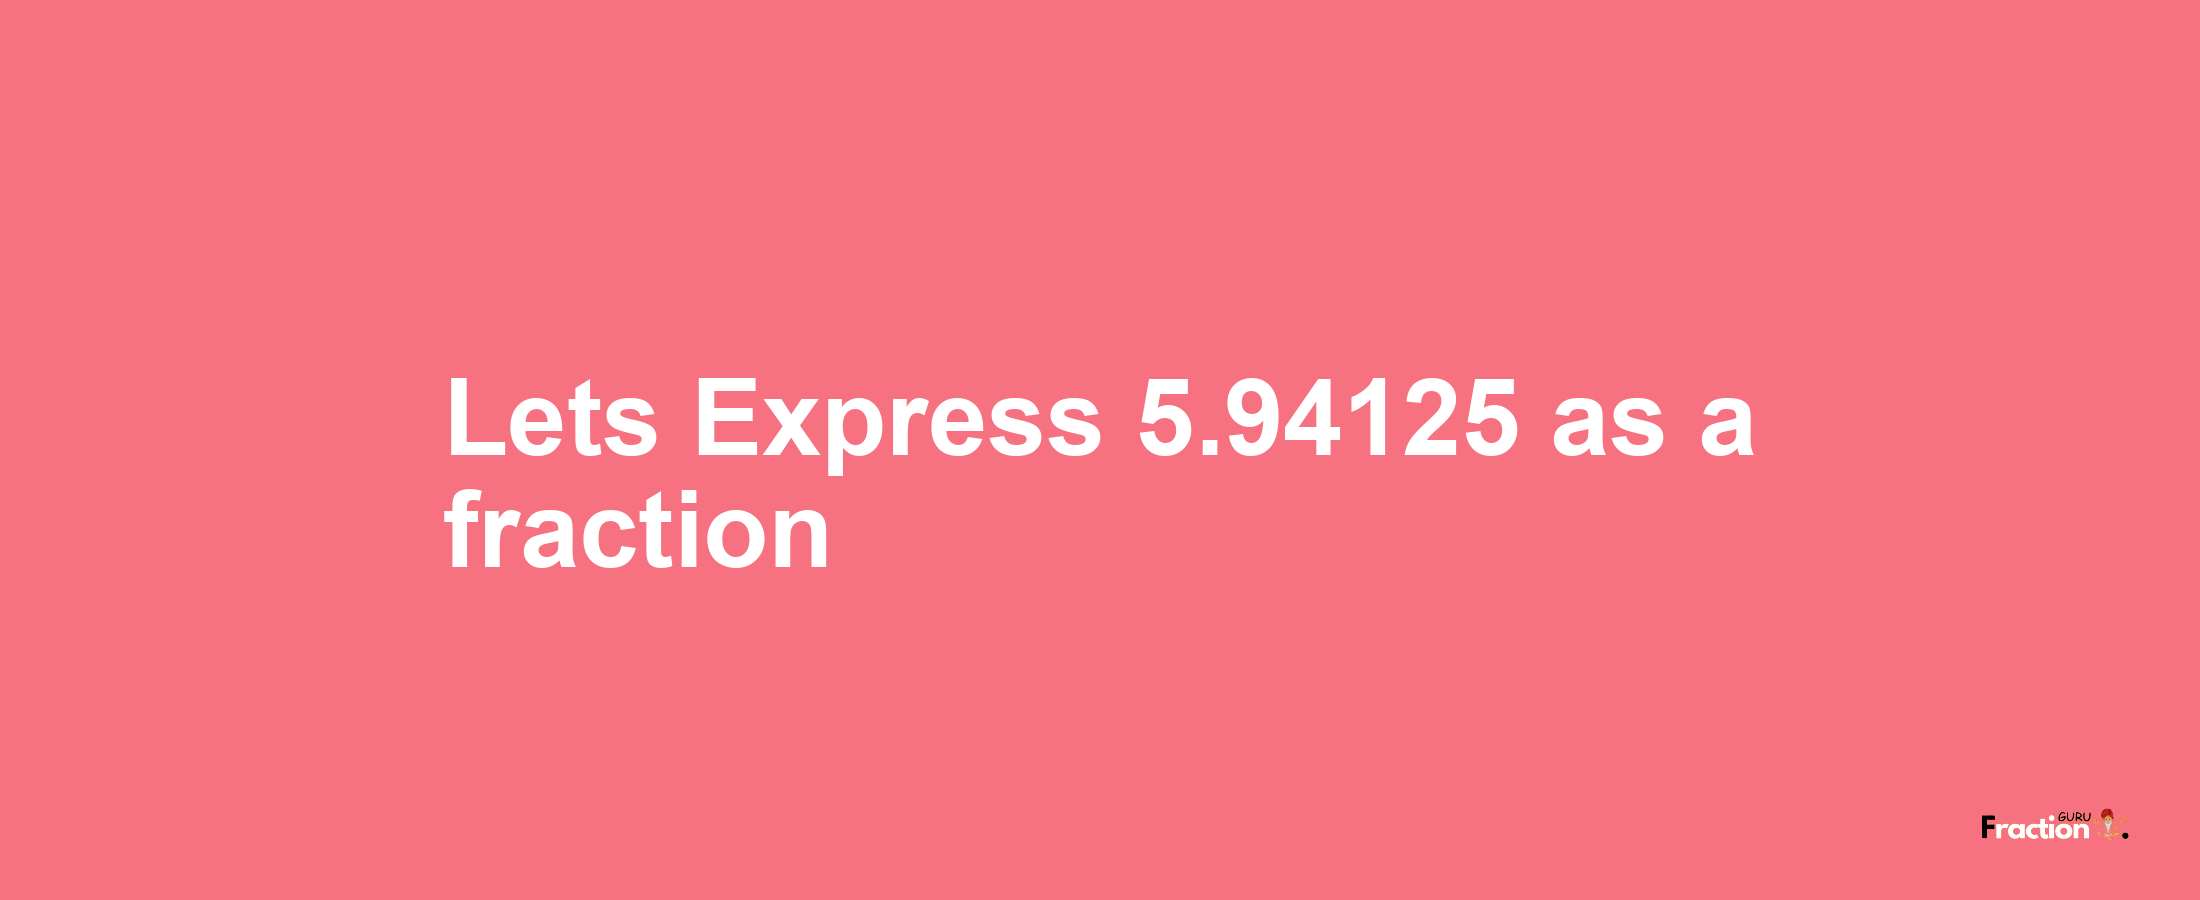 Lets Express 5.94125 as afraction